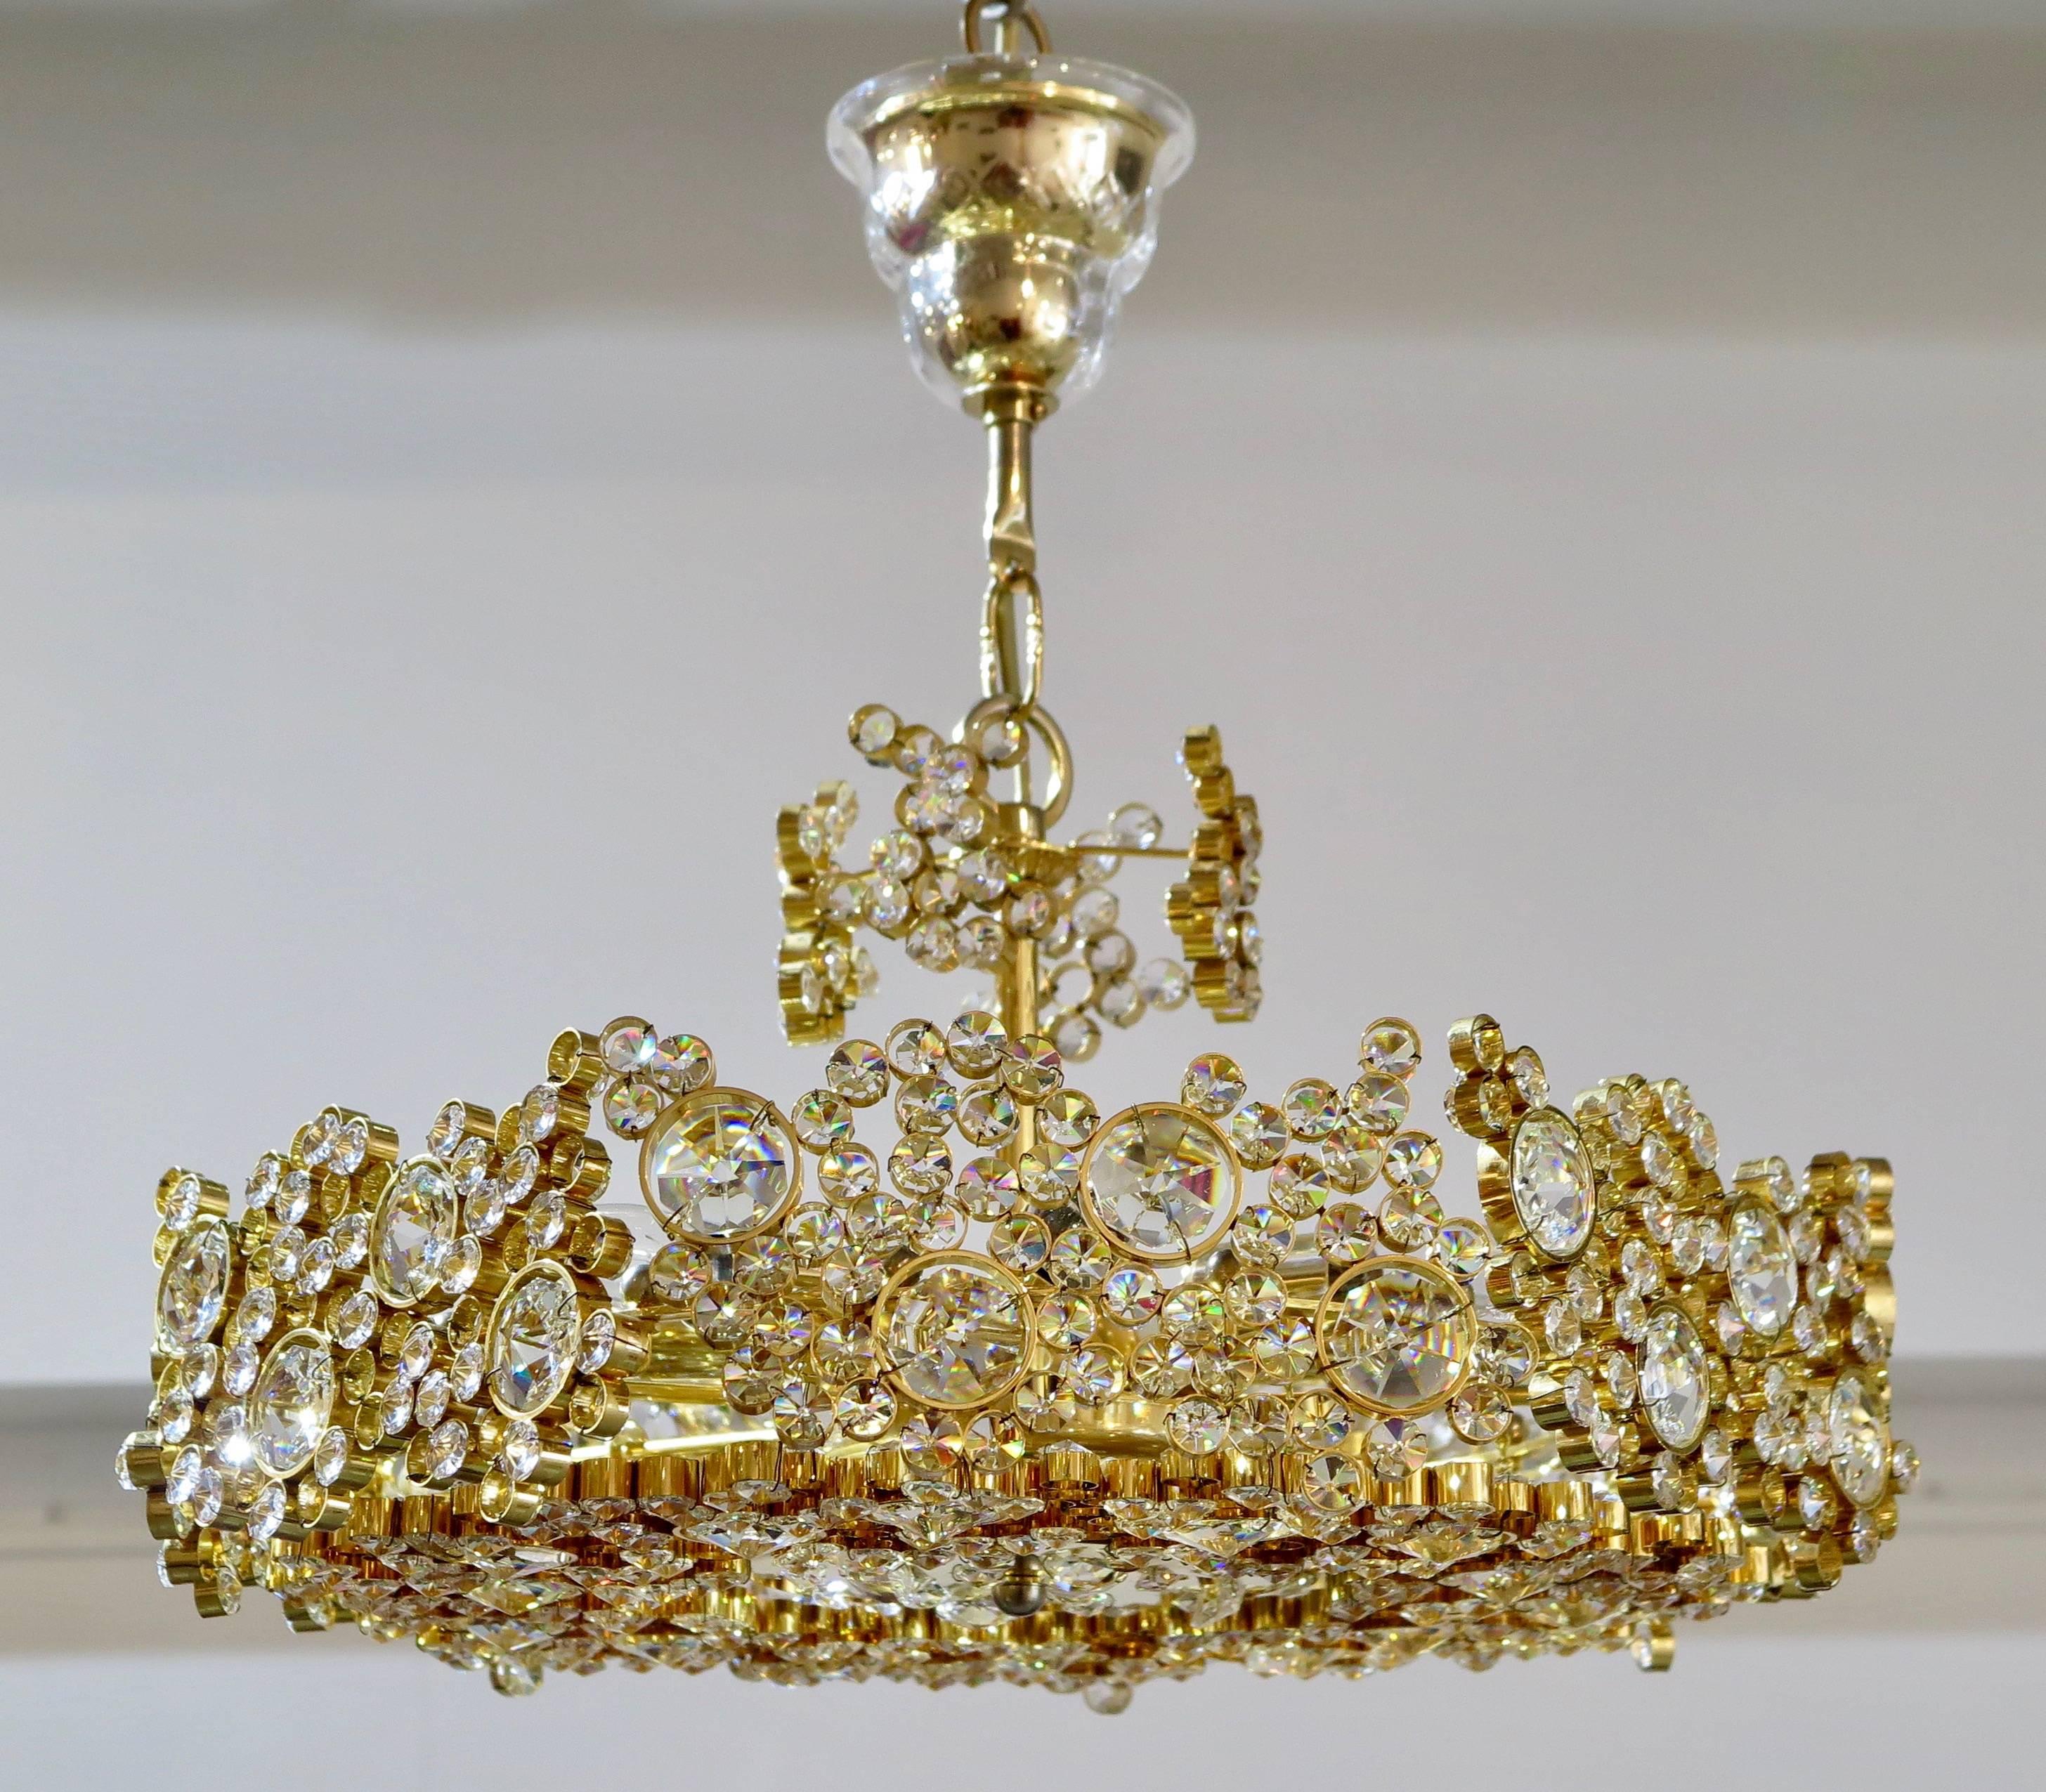 Spectacular jewel like chandelier with hundreds of crystals set in gold plated brass in the style of Lobmeyr, Austria, circa 1960. Newly electrified with seven candelabra sockets.